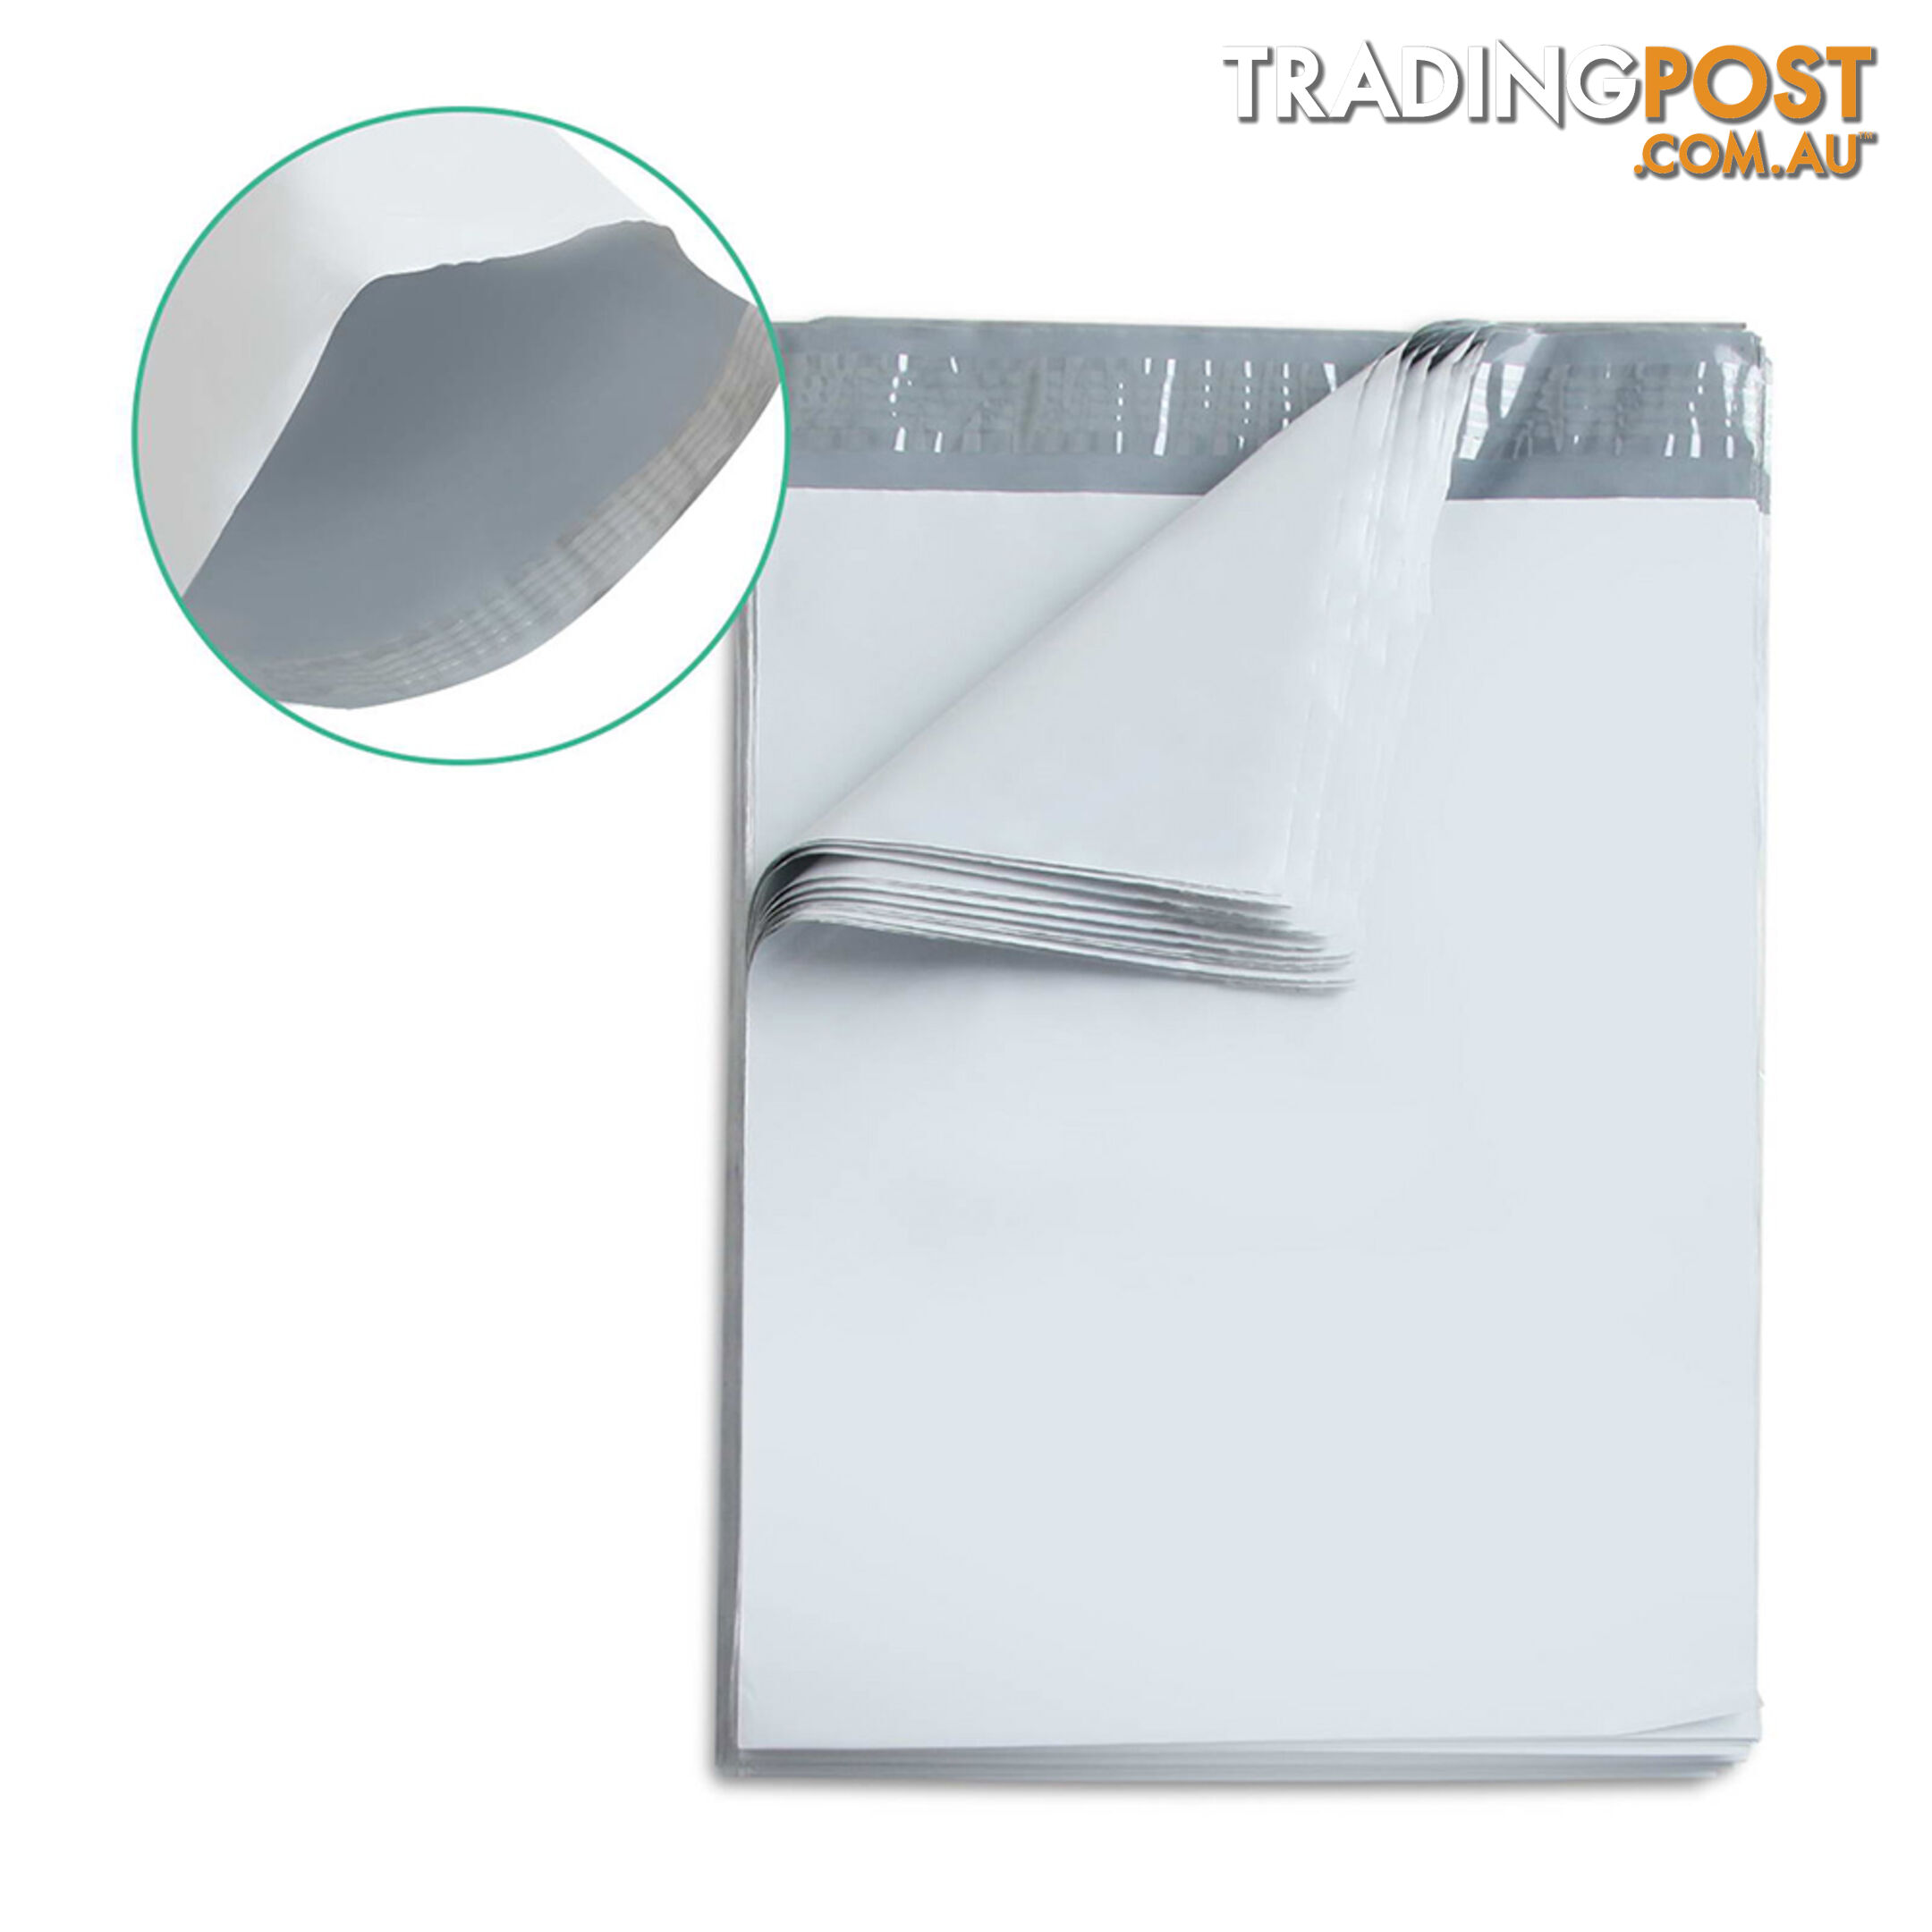 Set of 100 Poly Mailer Bags - 310 x 405mm